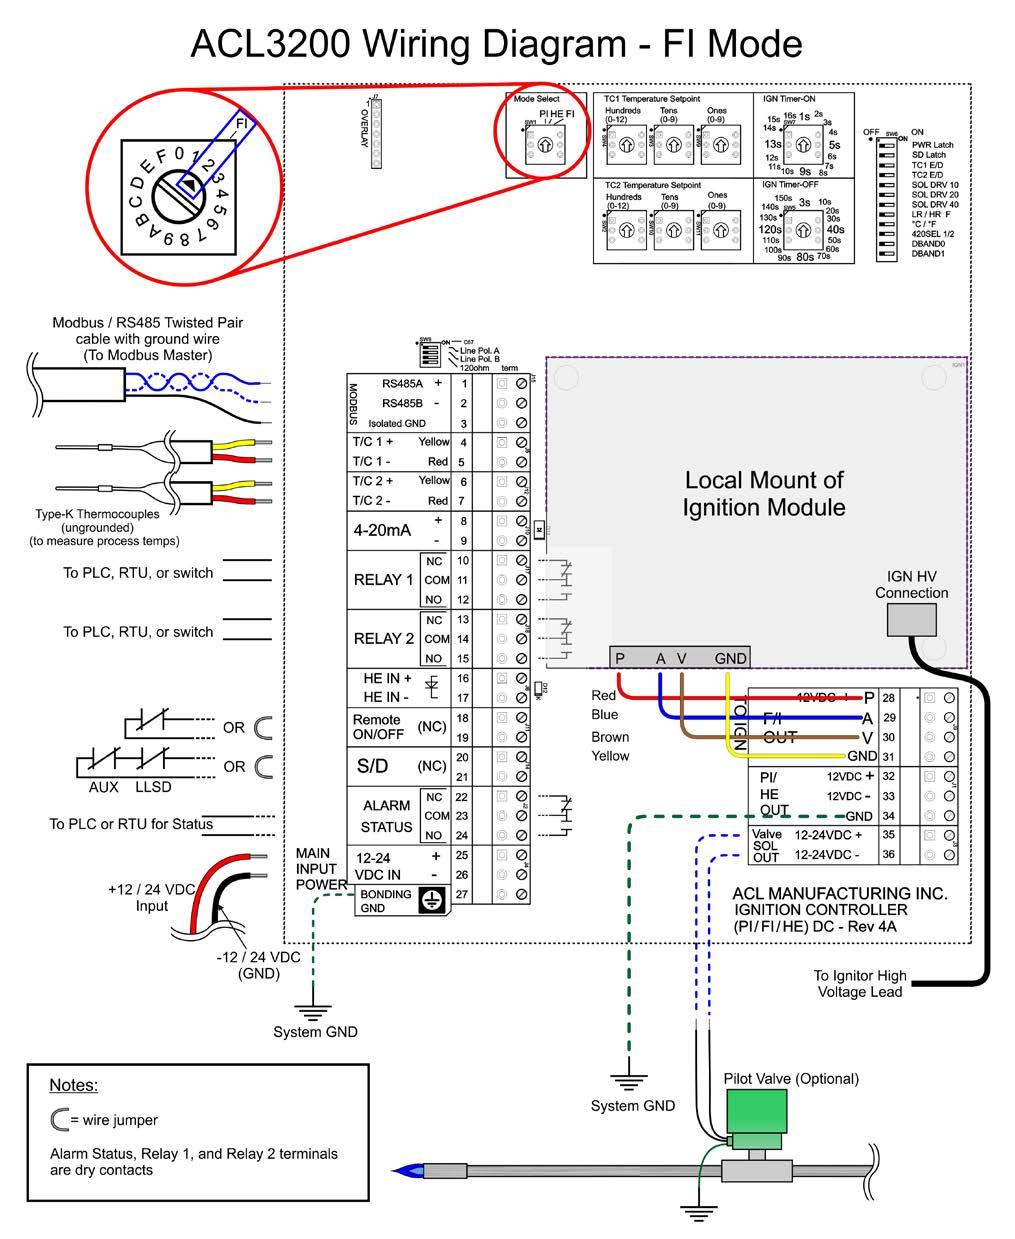 Flame Ionization (FI) Connection Diagram The following diagram shows the wiring connections for the